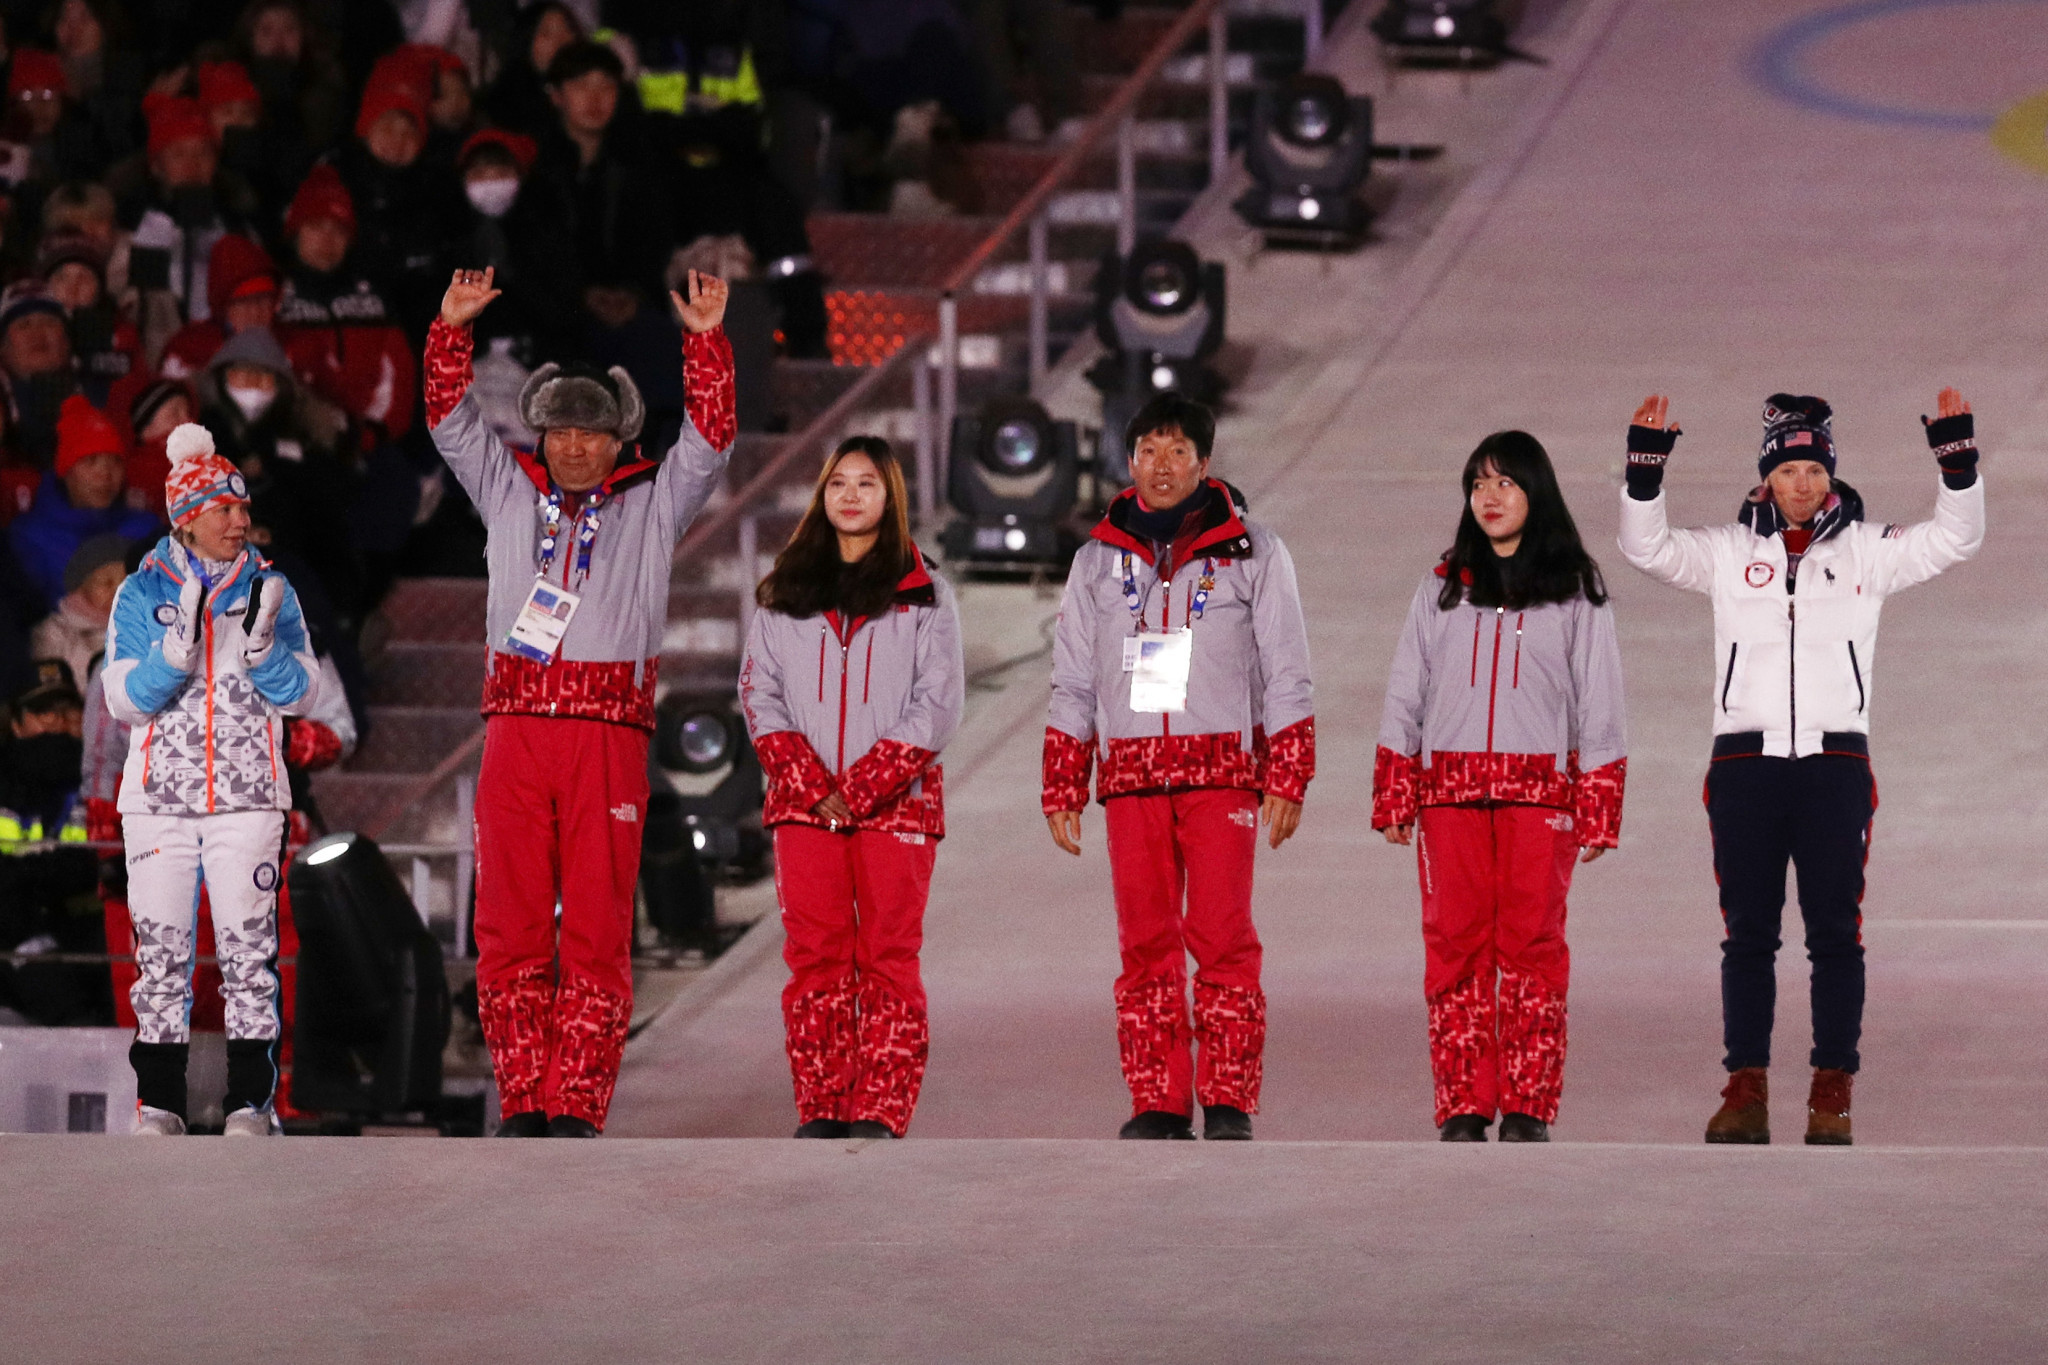 Elected members of the IOC Athletes' Commission were unveiled at the Closing Ceremony of the Pyeongchang 2018 Winter Games ©Getty Images